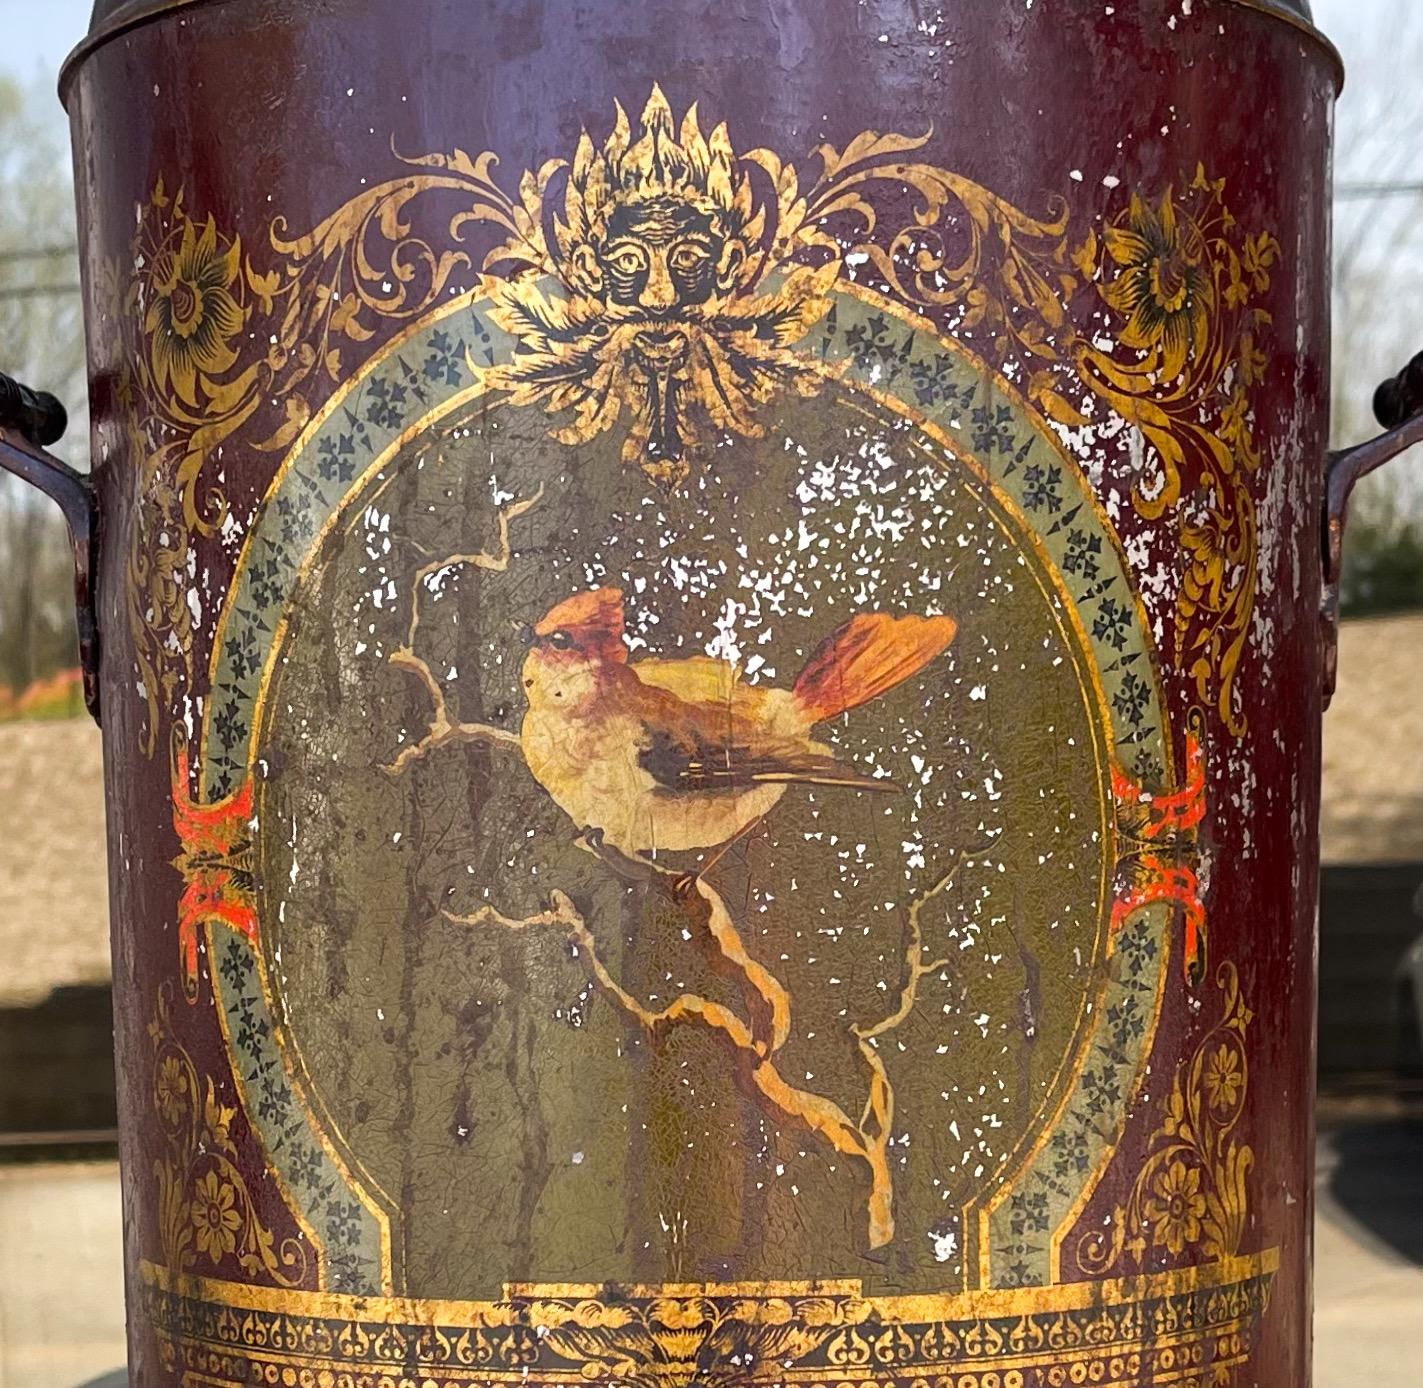 This is a 19th century tole water cooler by Adams & Westlake out of Chicago. It has an enamel interior with a brass spigot. The exterior shows paint losses that add to the patina.